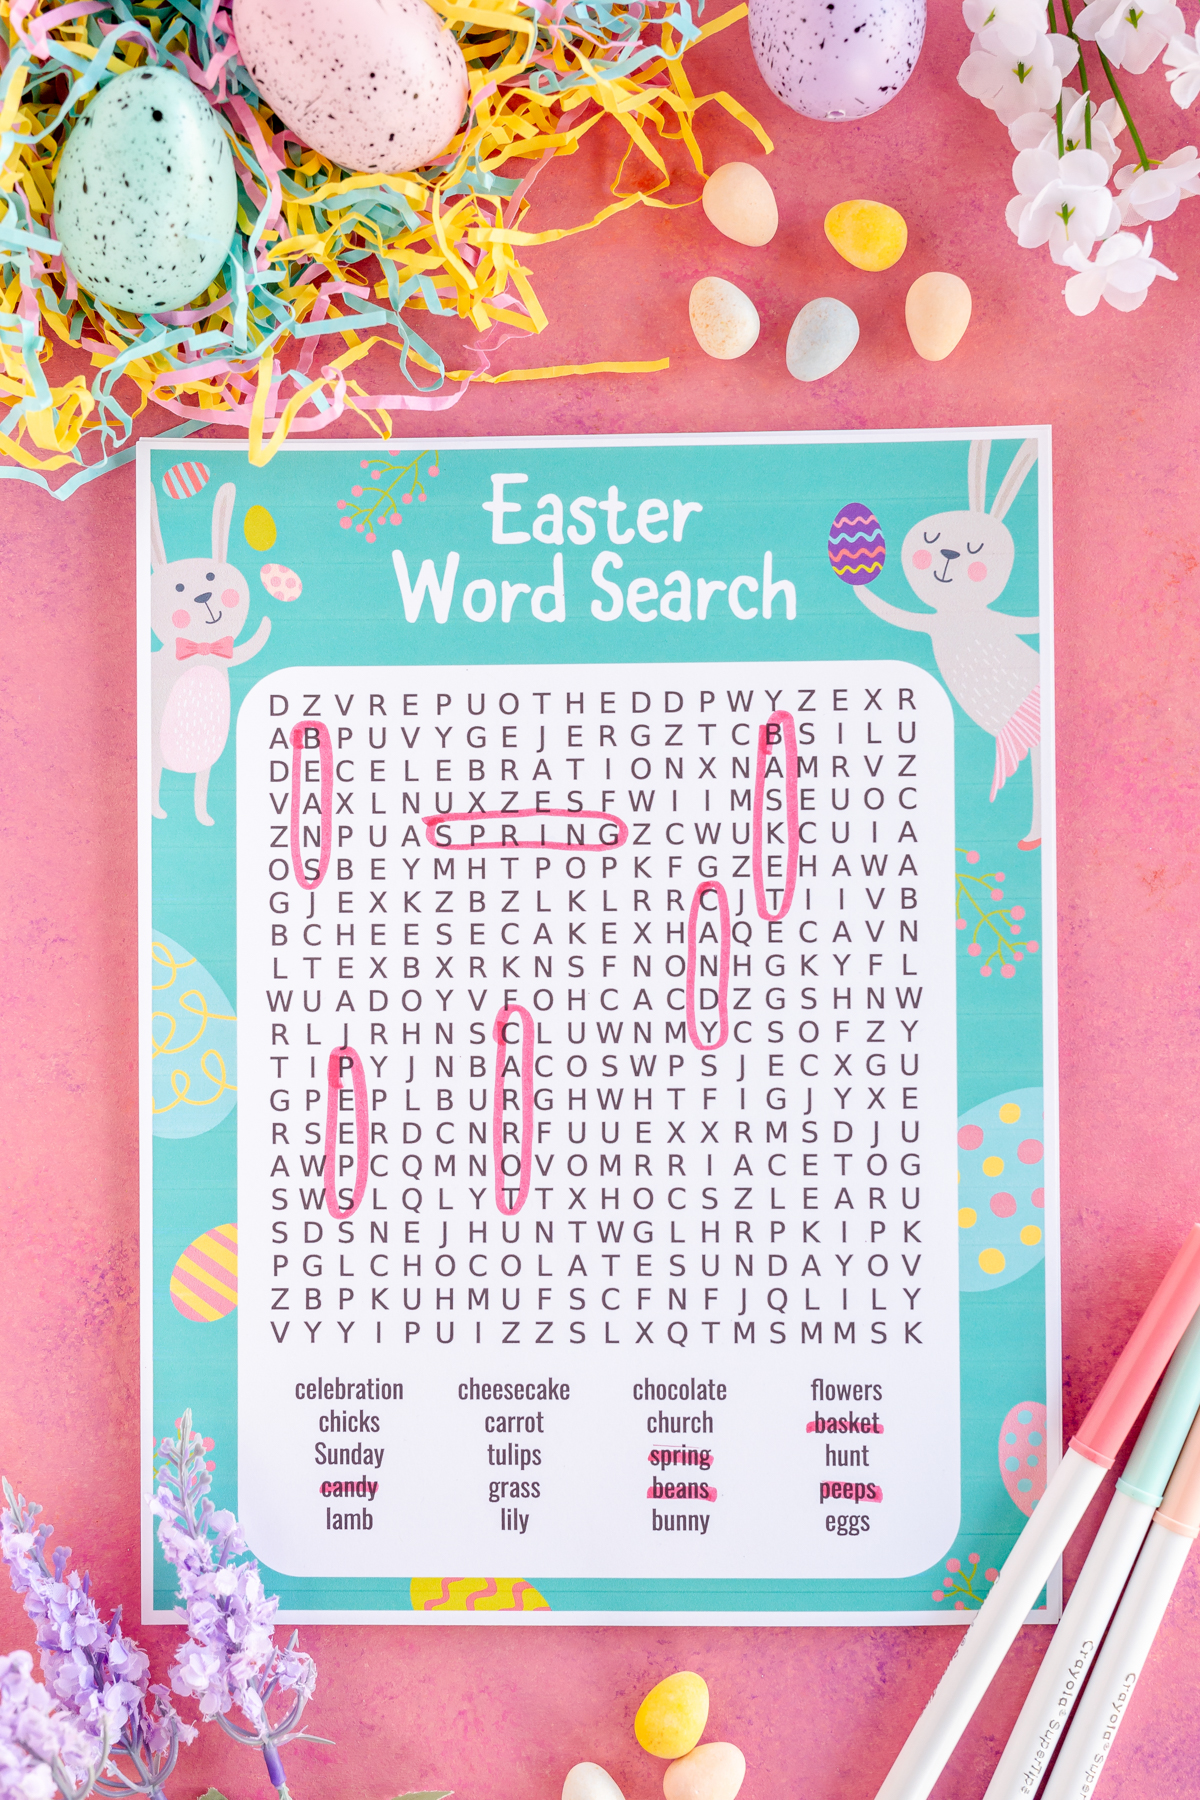 Easter word search with words circled